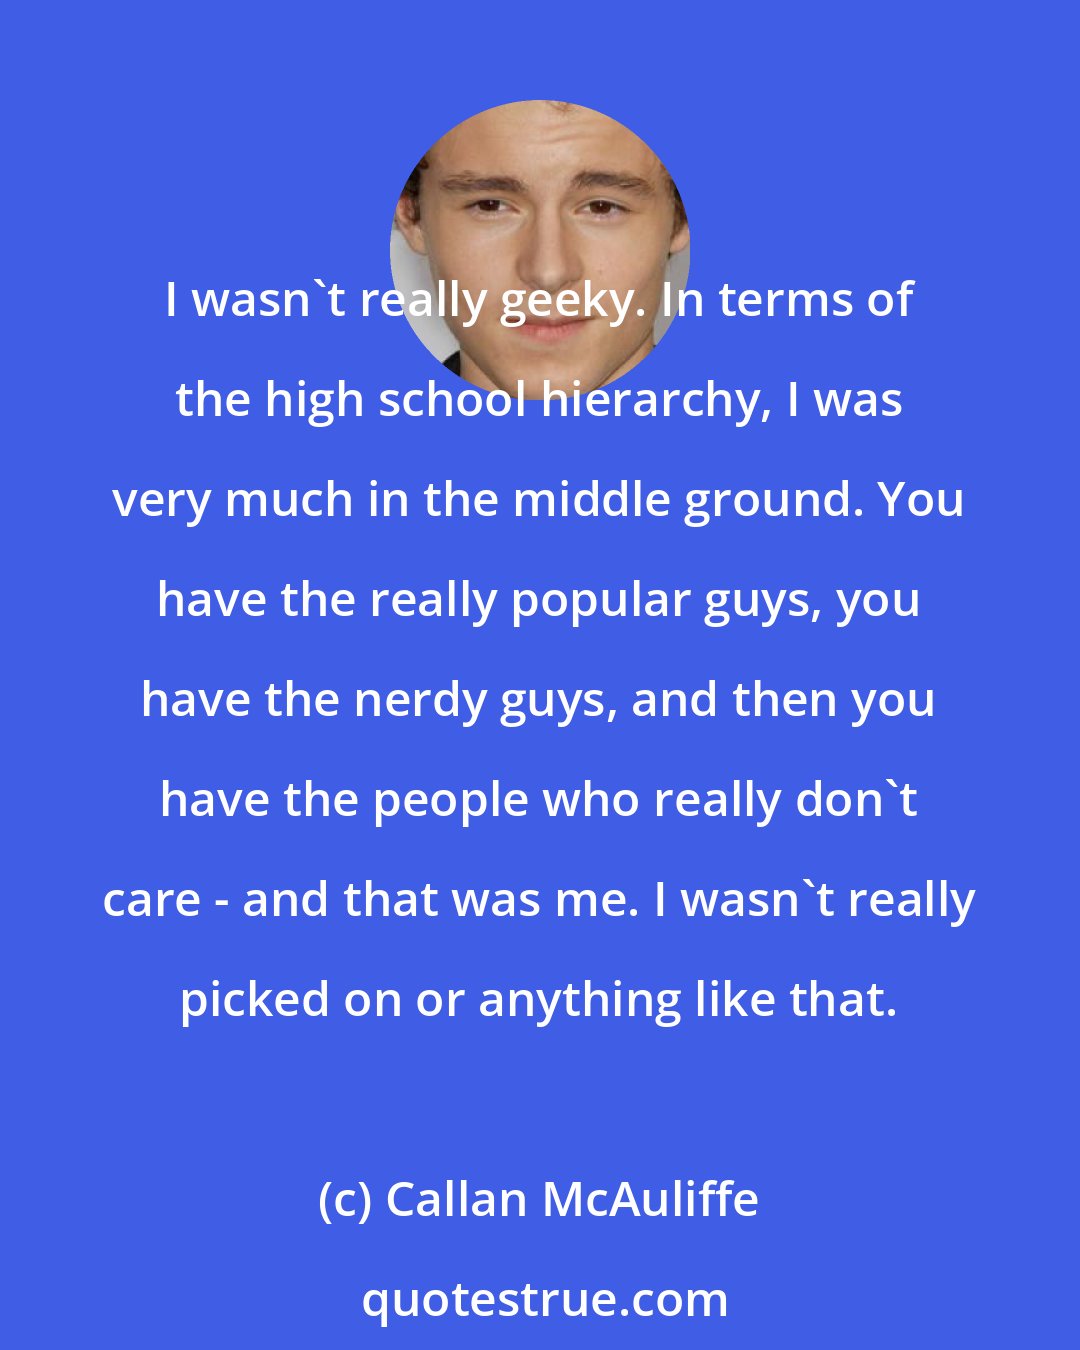 Callan McAuliffe: I wasn't really geeky. In terms of the high school hierarchy, I was very much in the middle ground. You have the really popular guys, you have the nerdy guys, and then you have the people who really don't care - and that was me. I wasn't really picked on or anything like that.